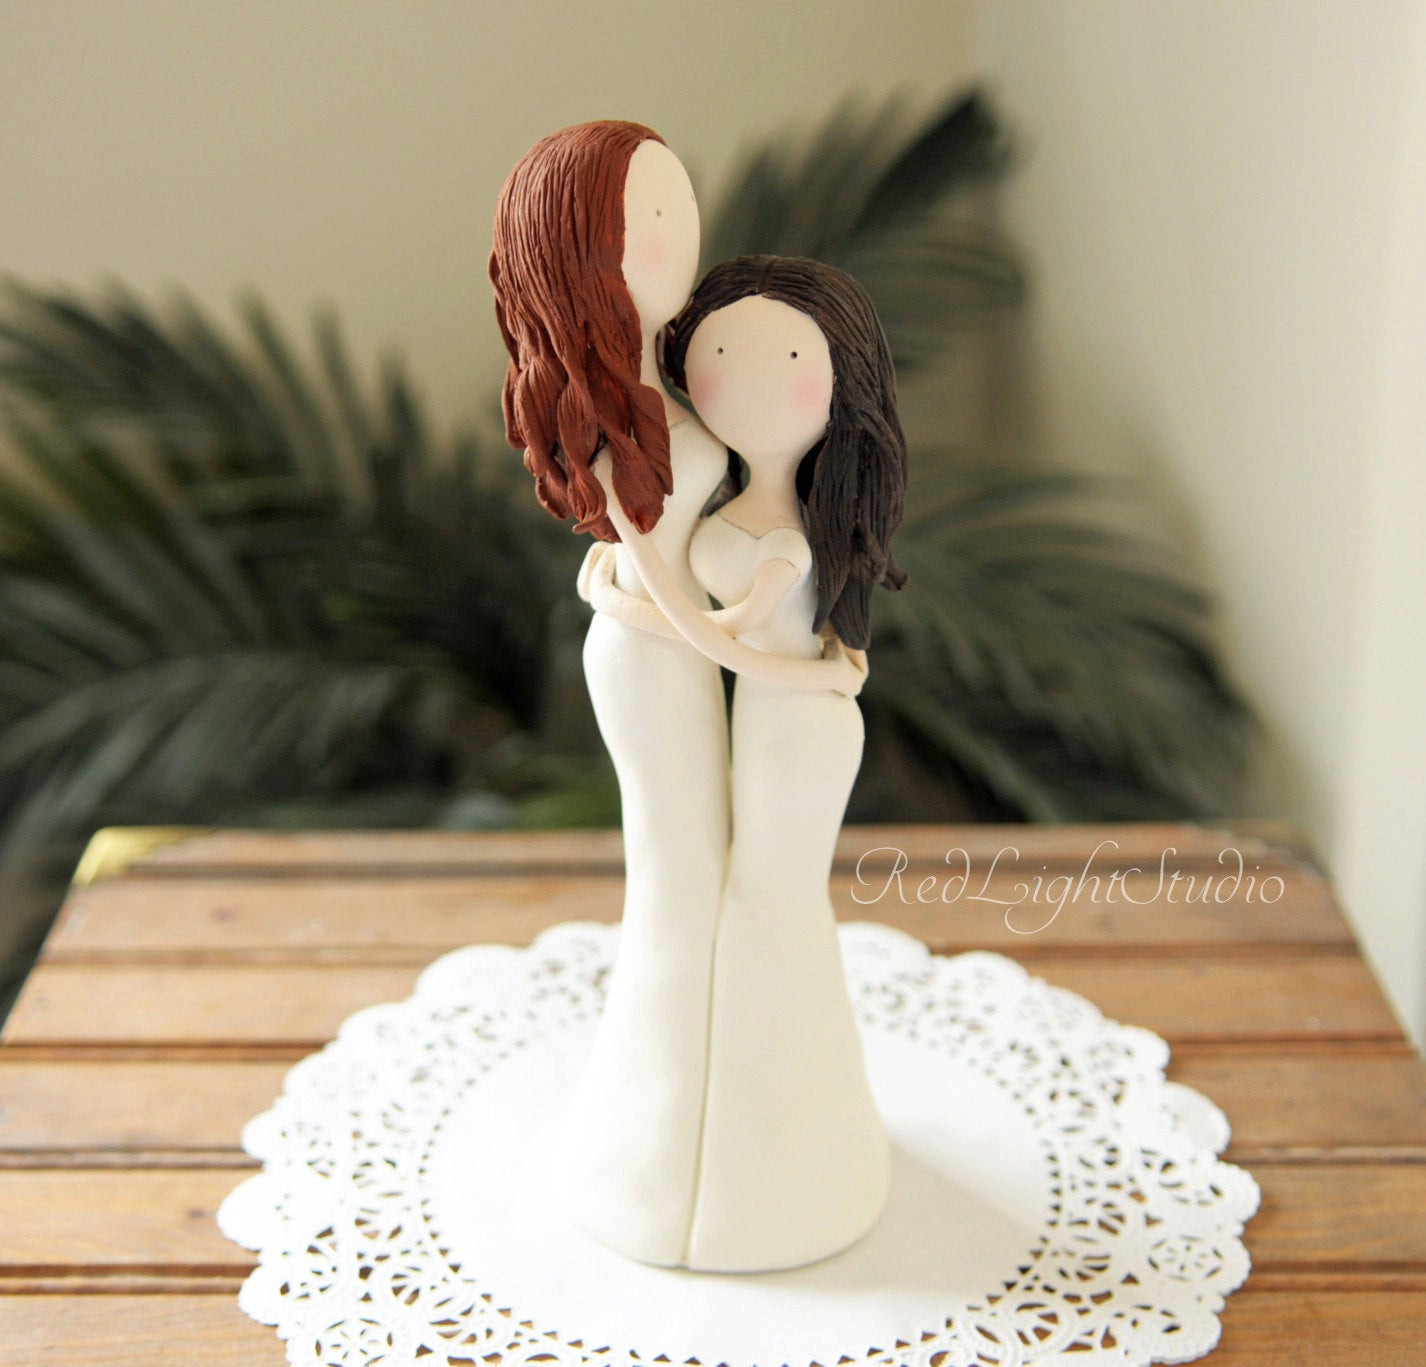 Lesbian Wedding Cake Toppers
 Same Wedding Cake Toppers Couple Sculpture